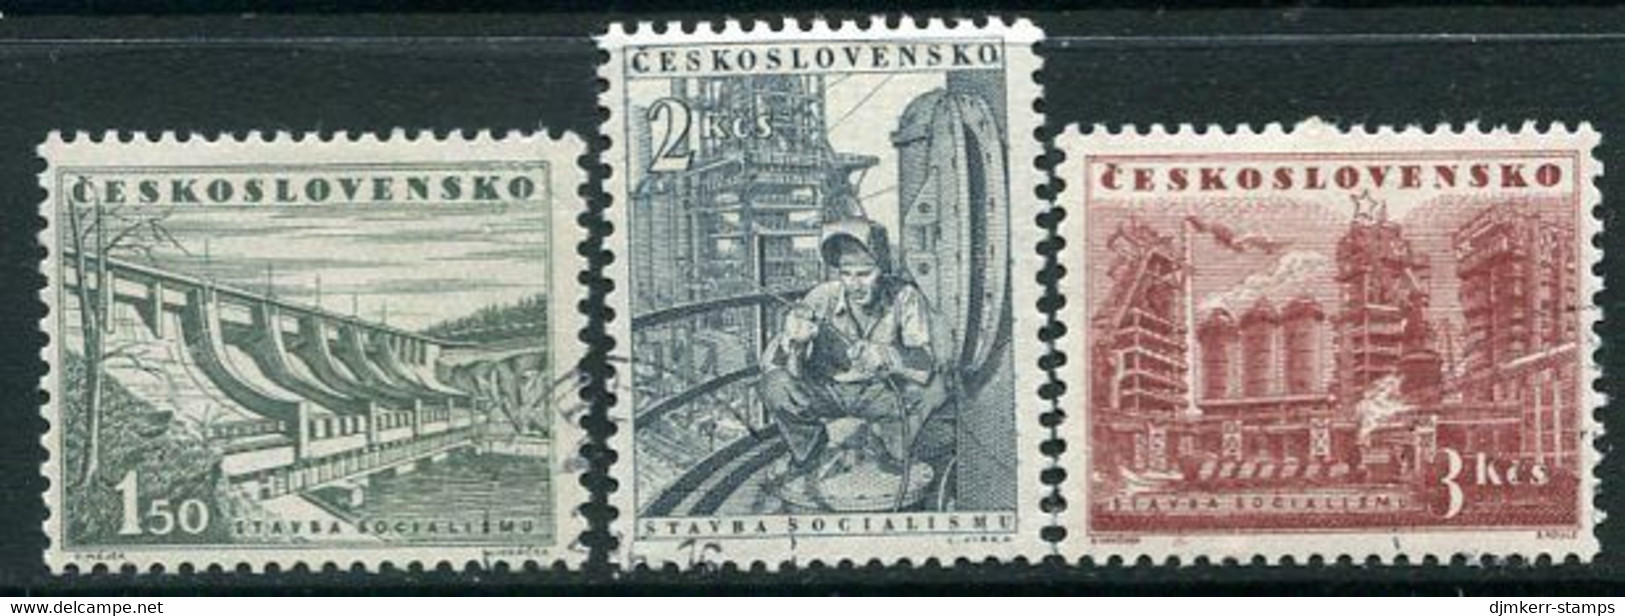 CZECHOSLOVAKIA 1953 Building Of Scialism Used.  Michel 8003-05 - Used Stamps